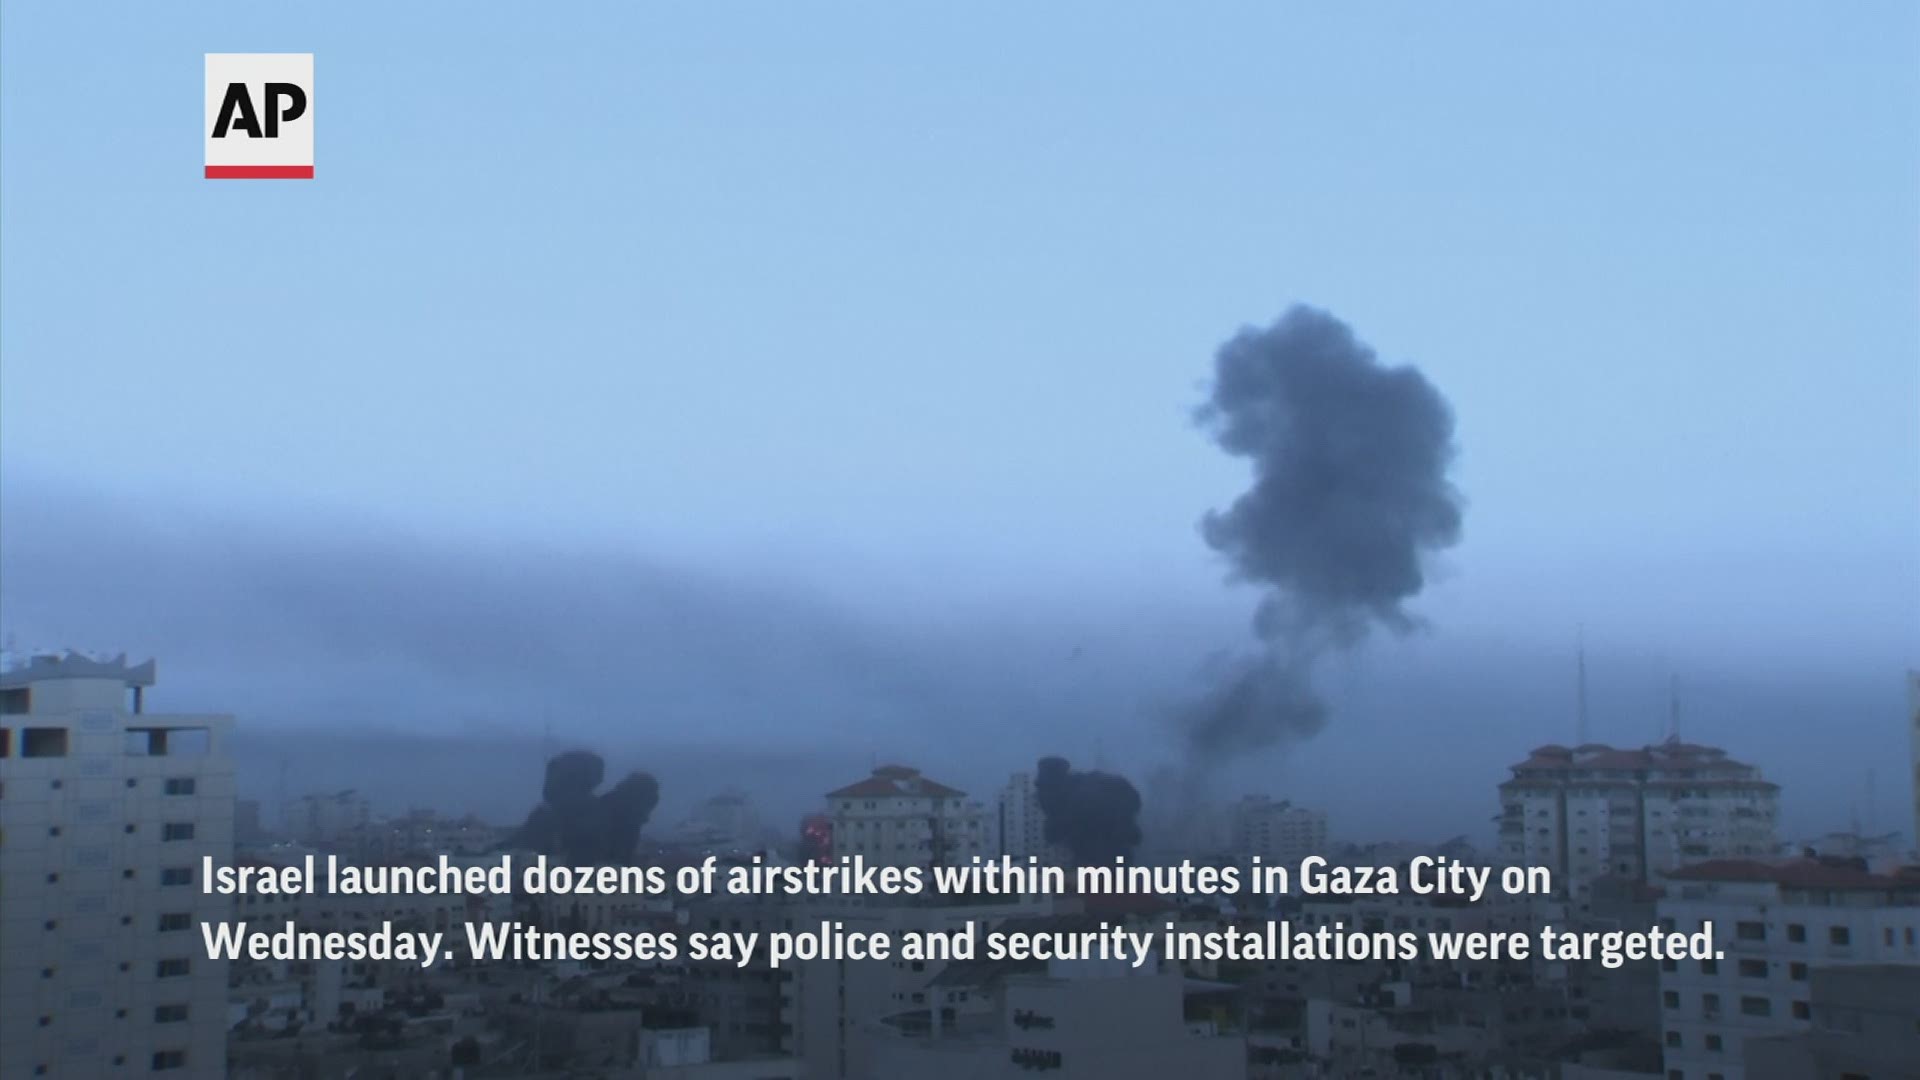 Rockets streamed out of Gaza and Israel pounded the territory with airstrikes early Wednesday as the most severe outbreak of violence since 2014.